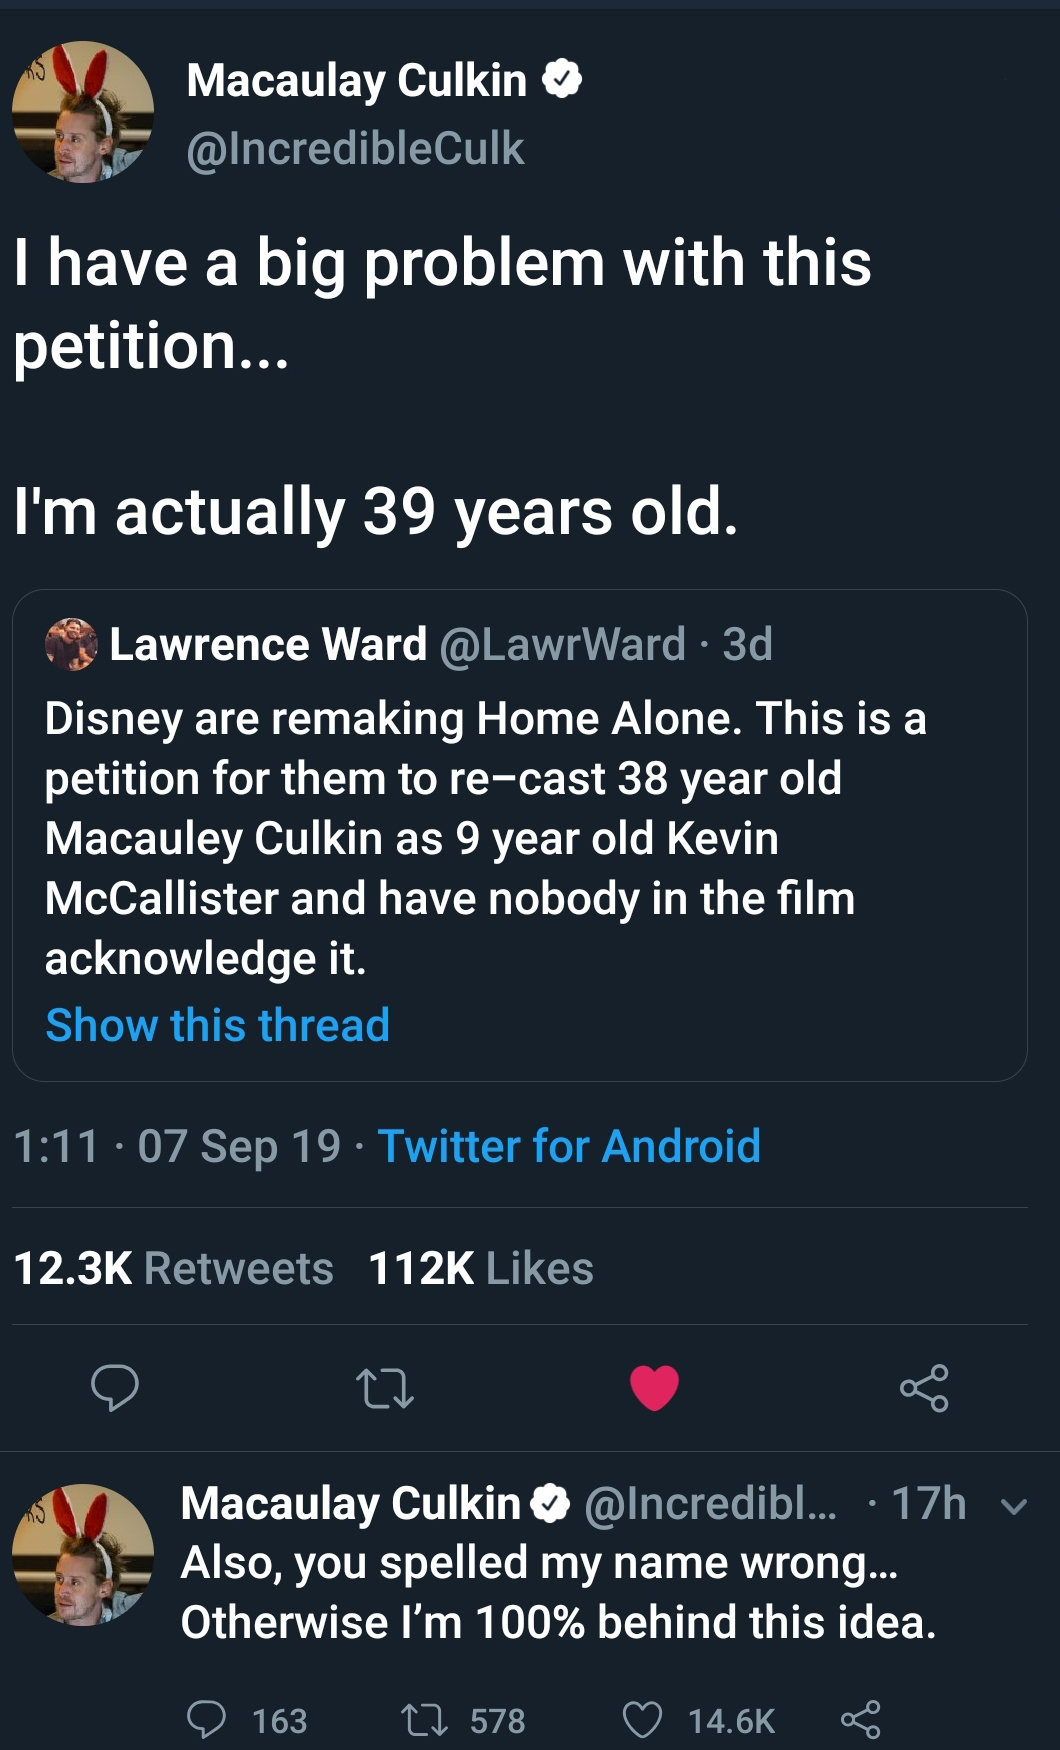 jquery 1.3 with php - Macaulay Culkin I have a big problem with this petition... I'm actually 39 years old. Lawrence Ward 3d Disney are remaking Home Alone. This is a petition for them to recast 38 year old Macauley Culkin as 9 year old Kevin McCallister 